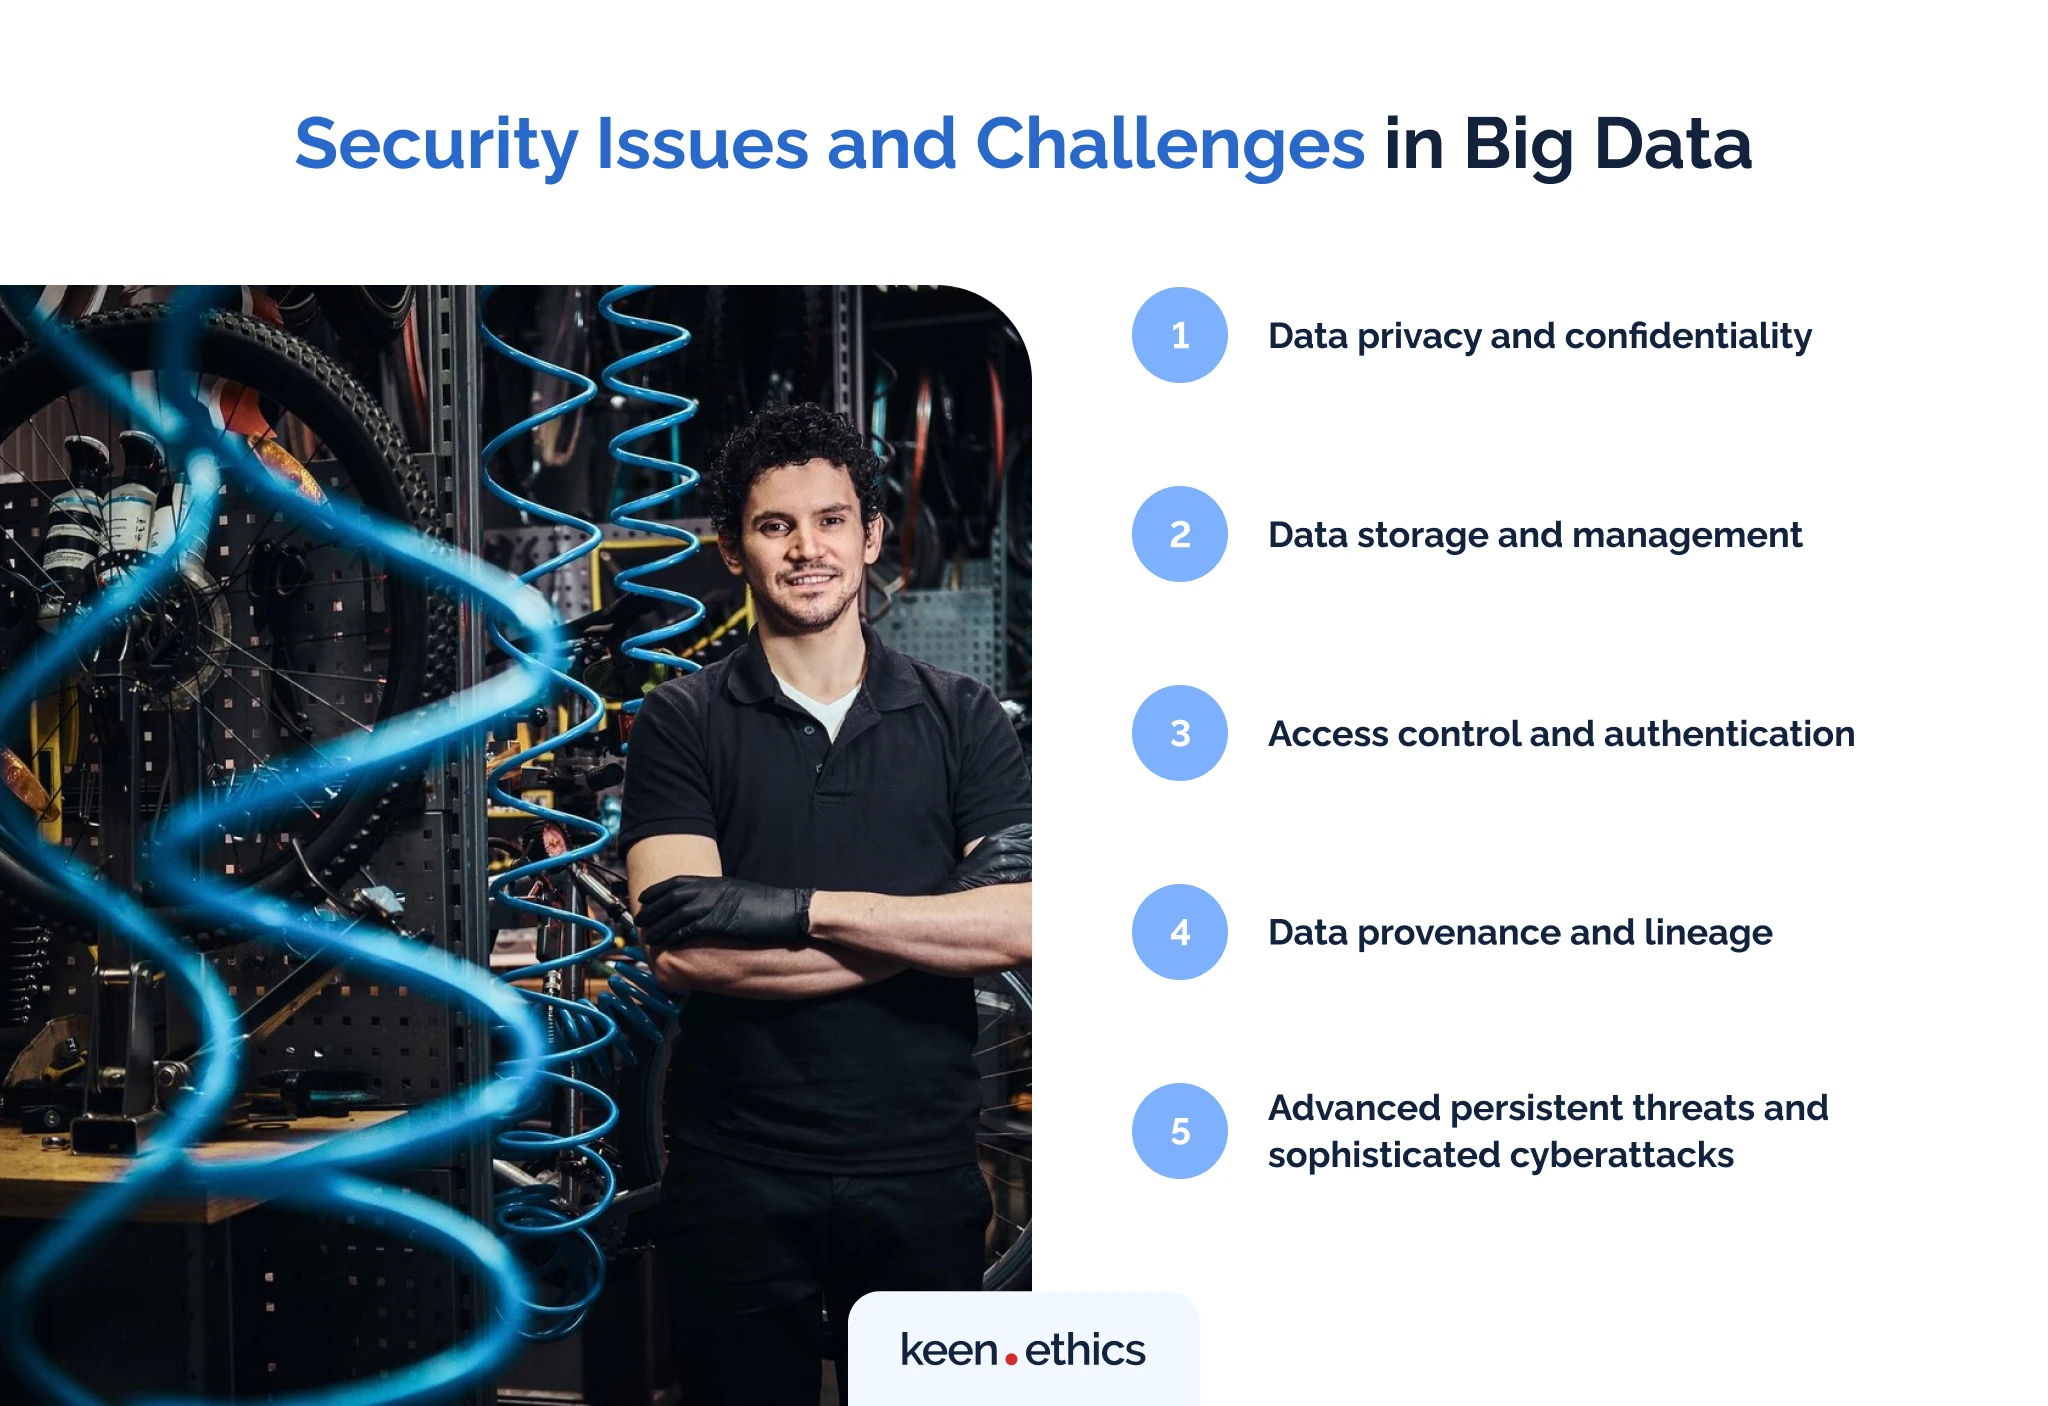 Security issues and challenges in Big Data